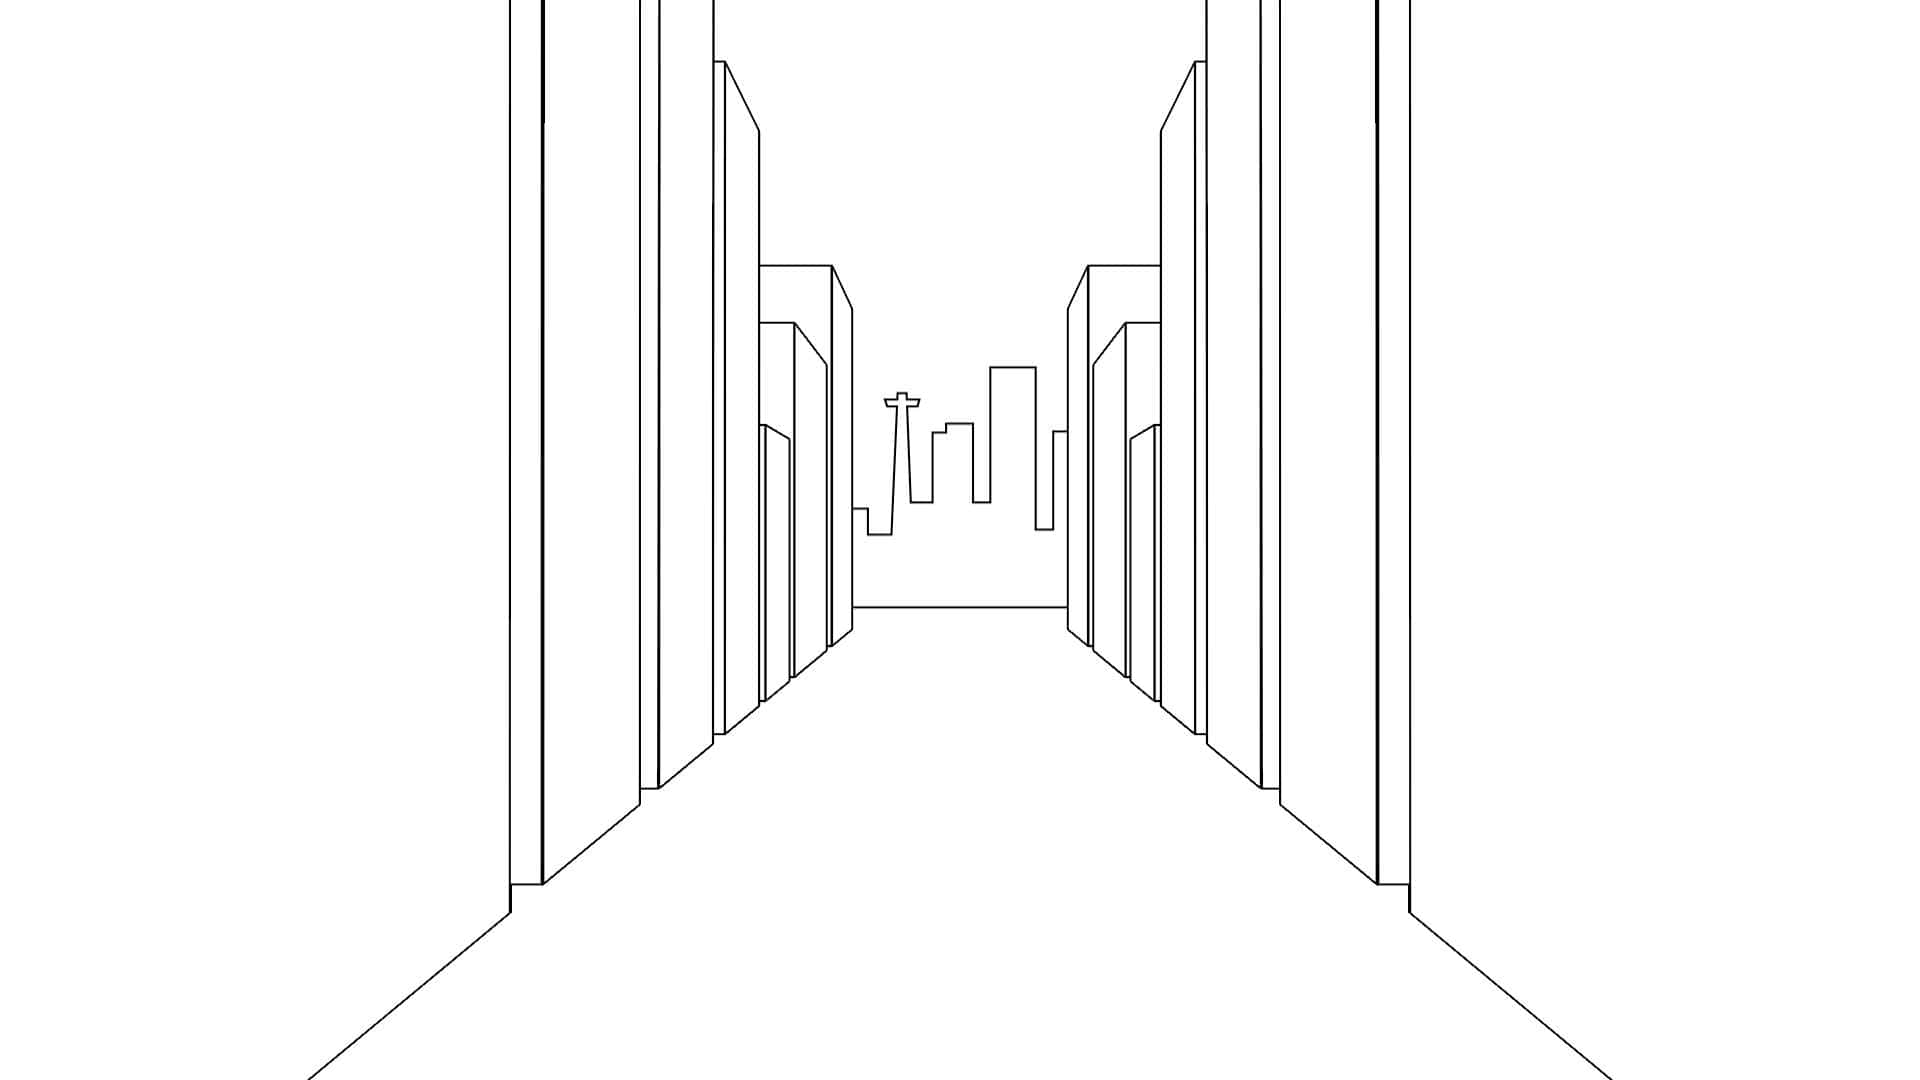 The point of view of someone walking through an illustrated city with a smartphone appearing.